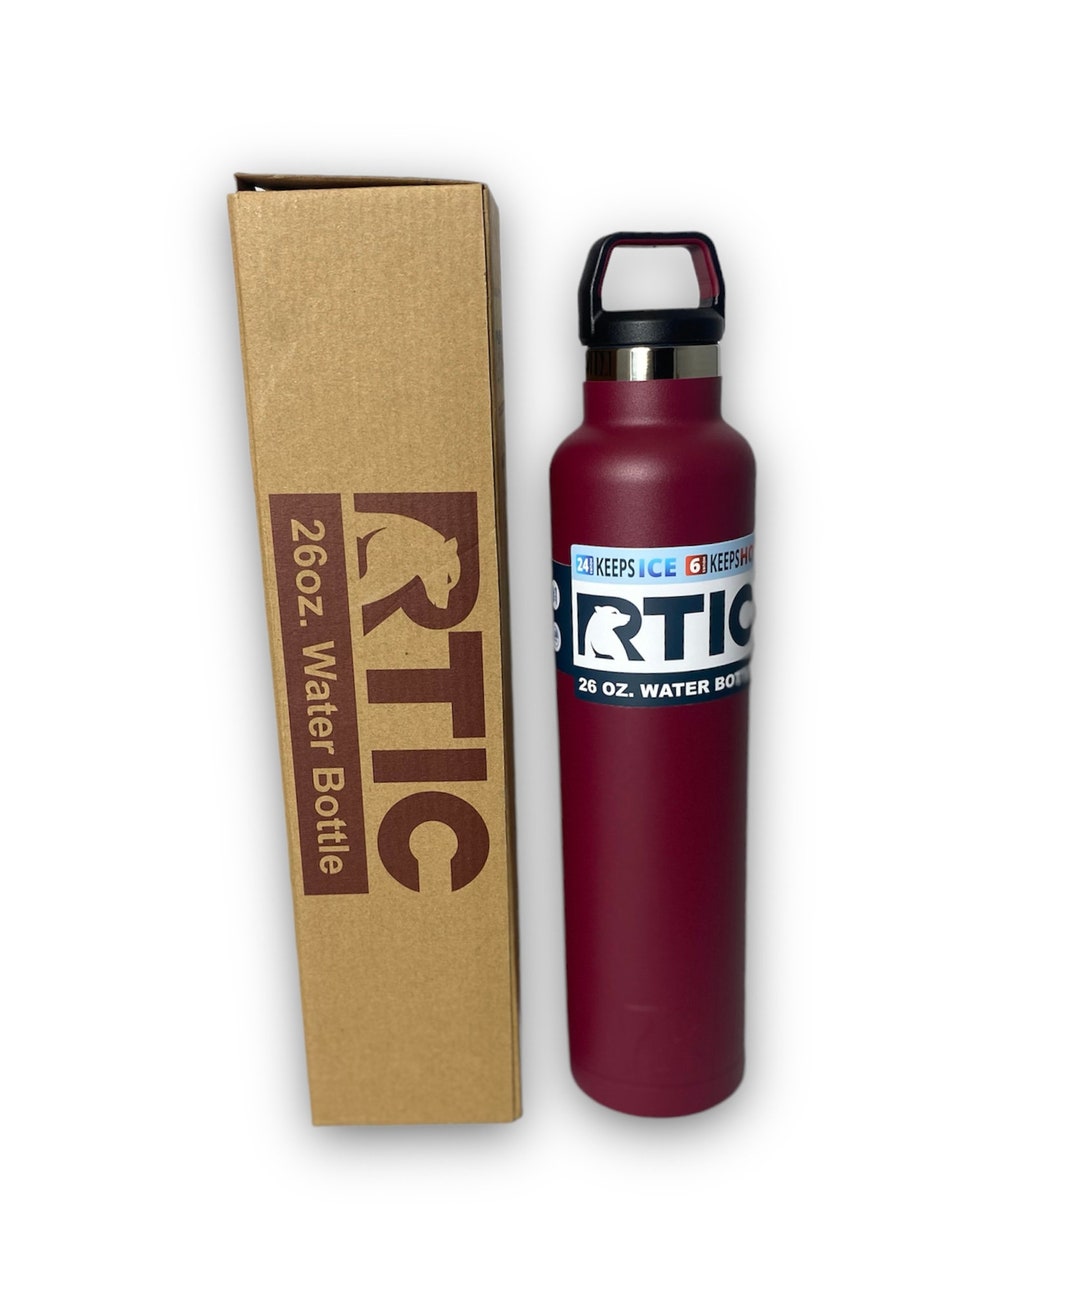 26 oz. RTIC Water Bottle – The Personalization Station